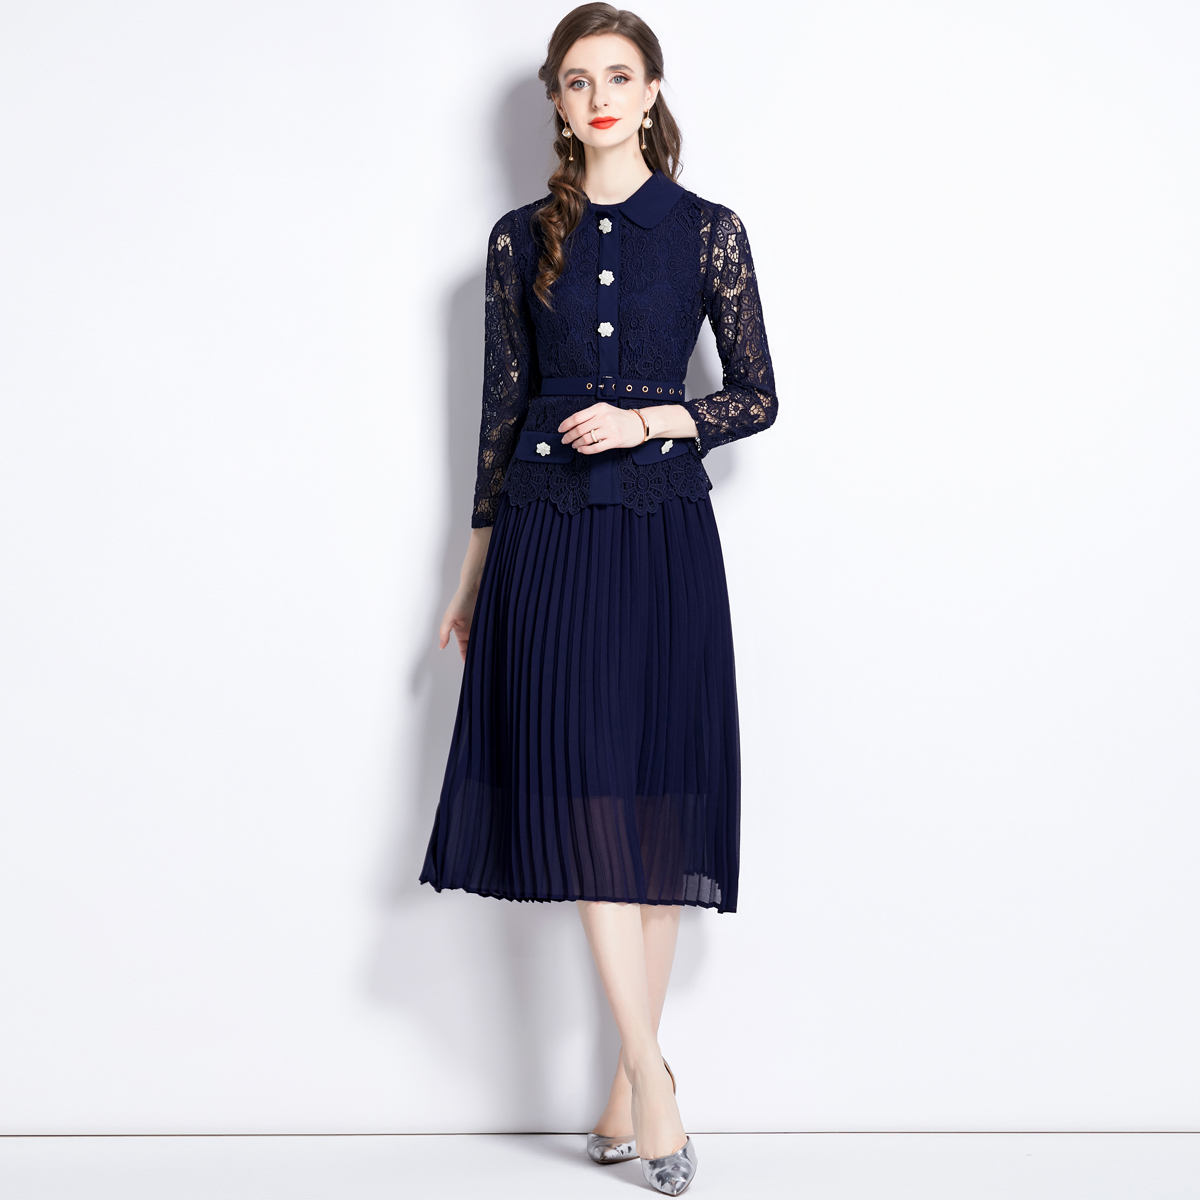 Lace hollow colors long pleated dress for women